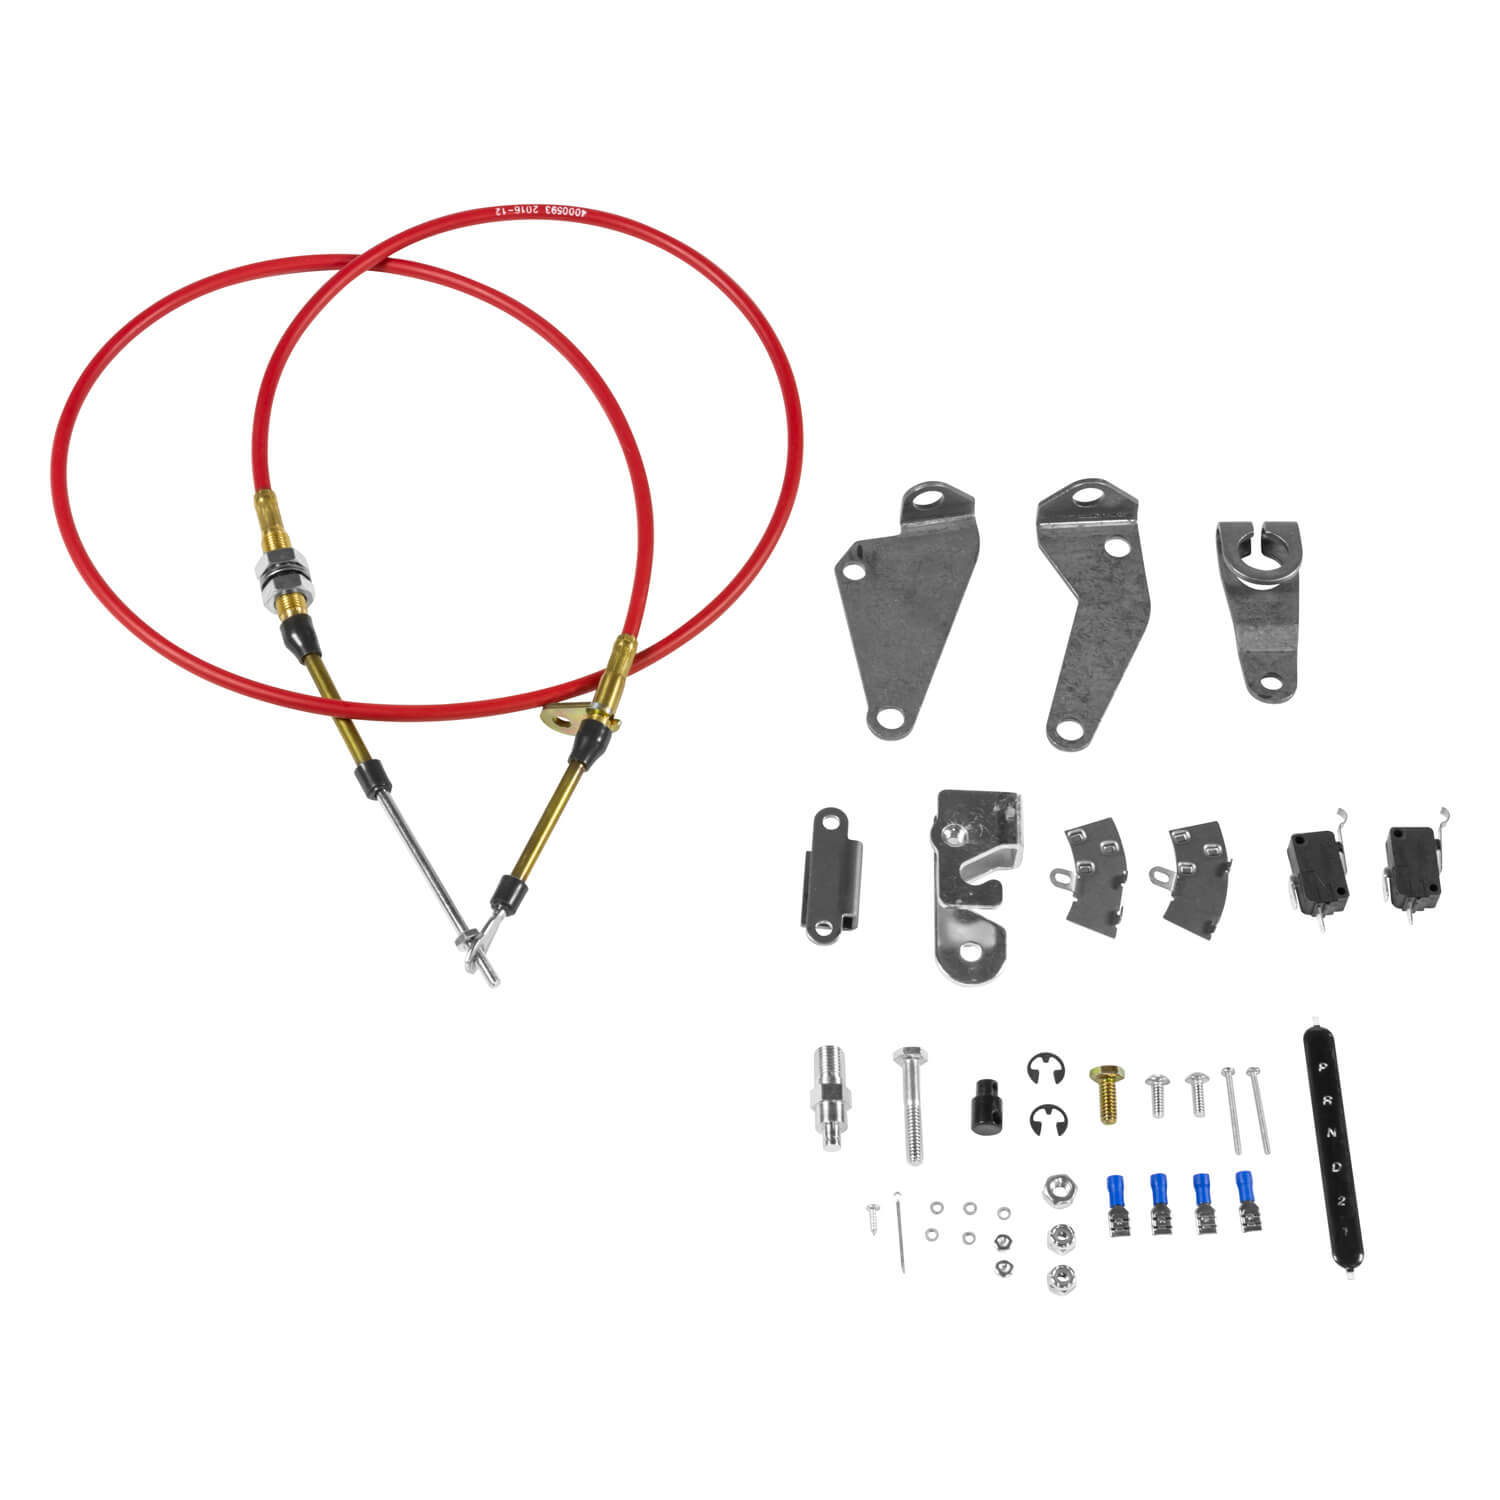 B&M 81020 Shifter Cable Kit, 5 ft Long, Transmission Shifter Lever and Bracket Included, C4, B&M Hammer Shifters, Kit